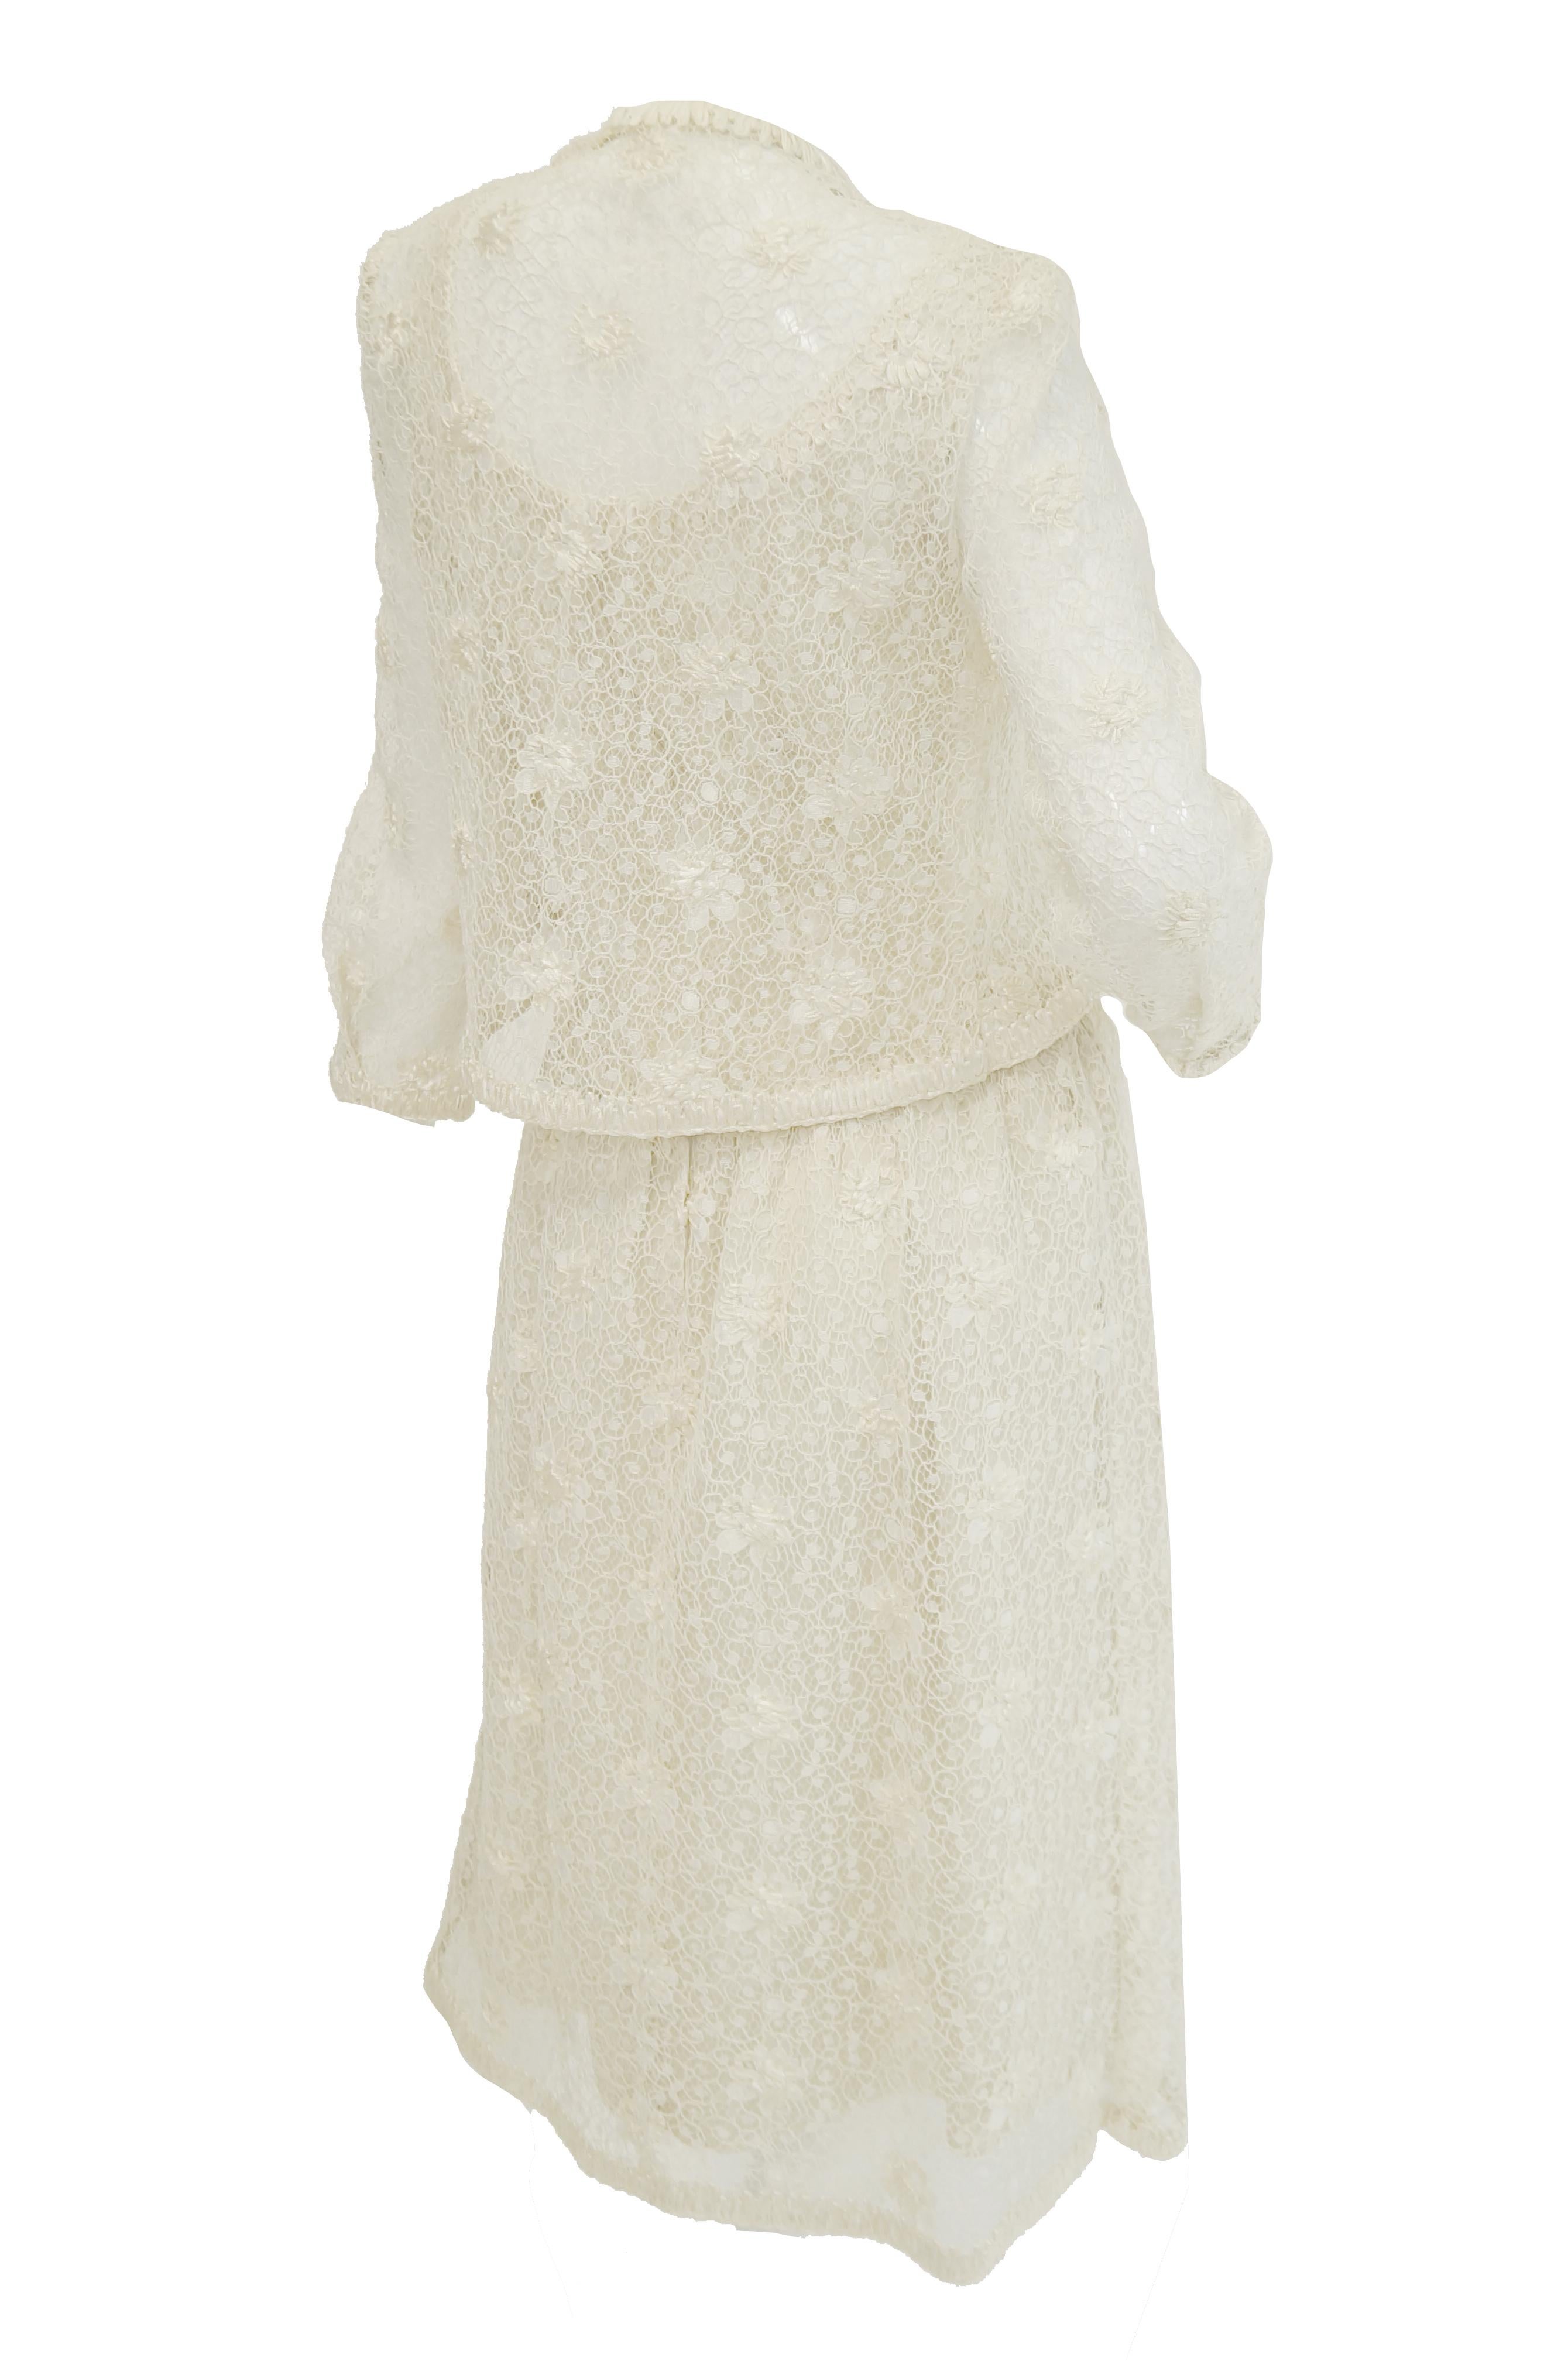 1960s Jean Louis Couture Ivory Lace and Ribbon Work Cocktail Dress and Jacket For Sale 5